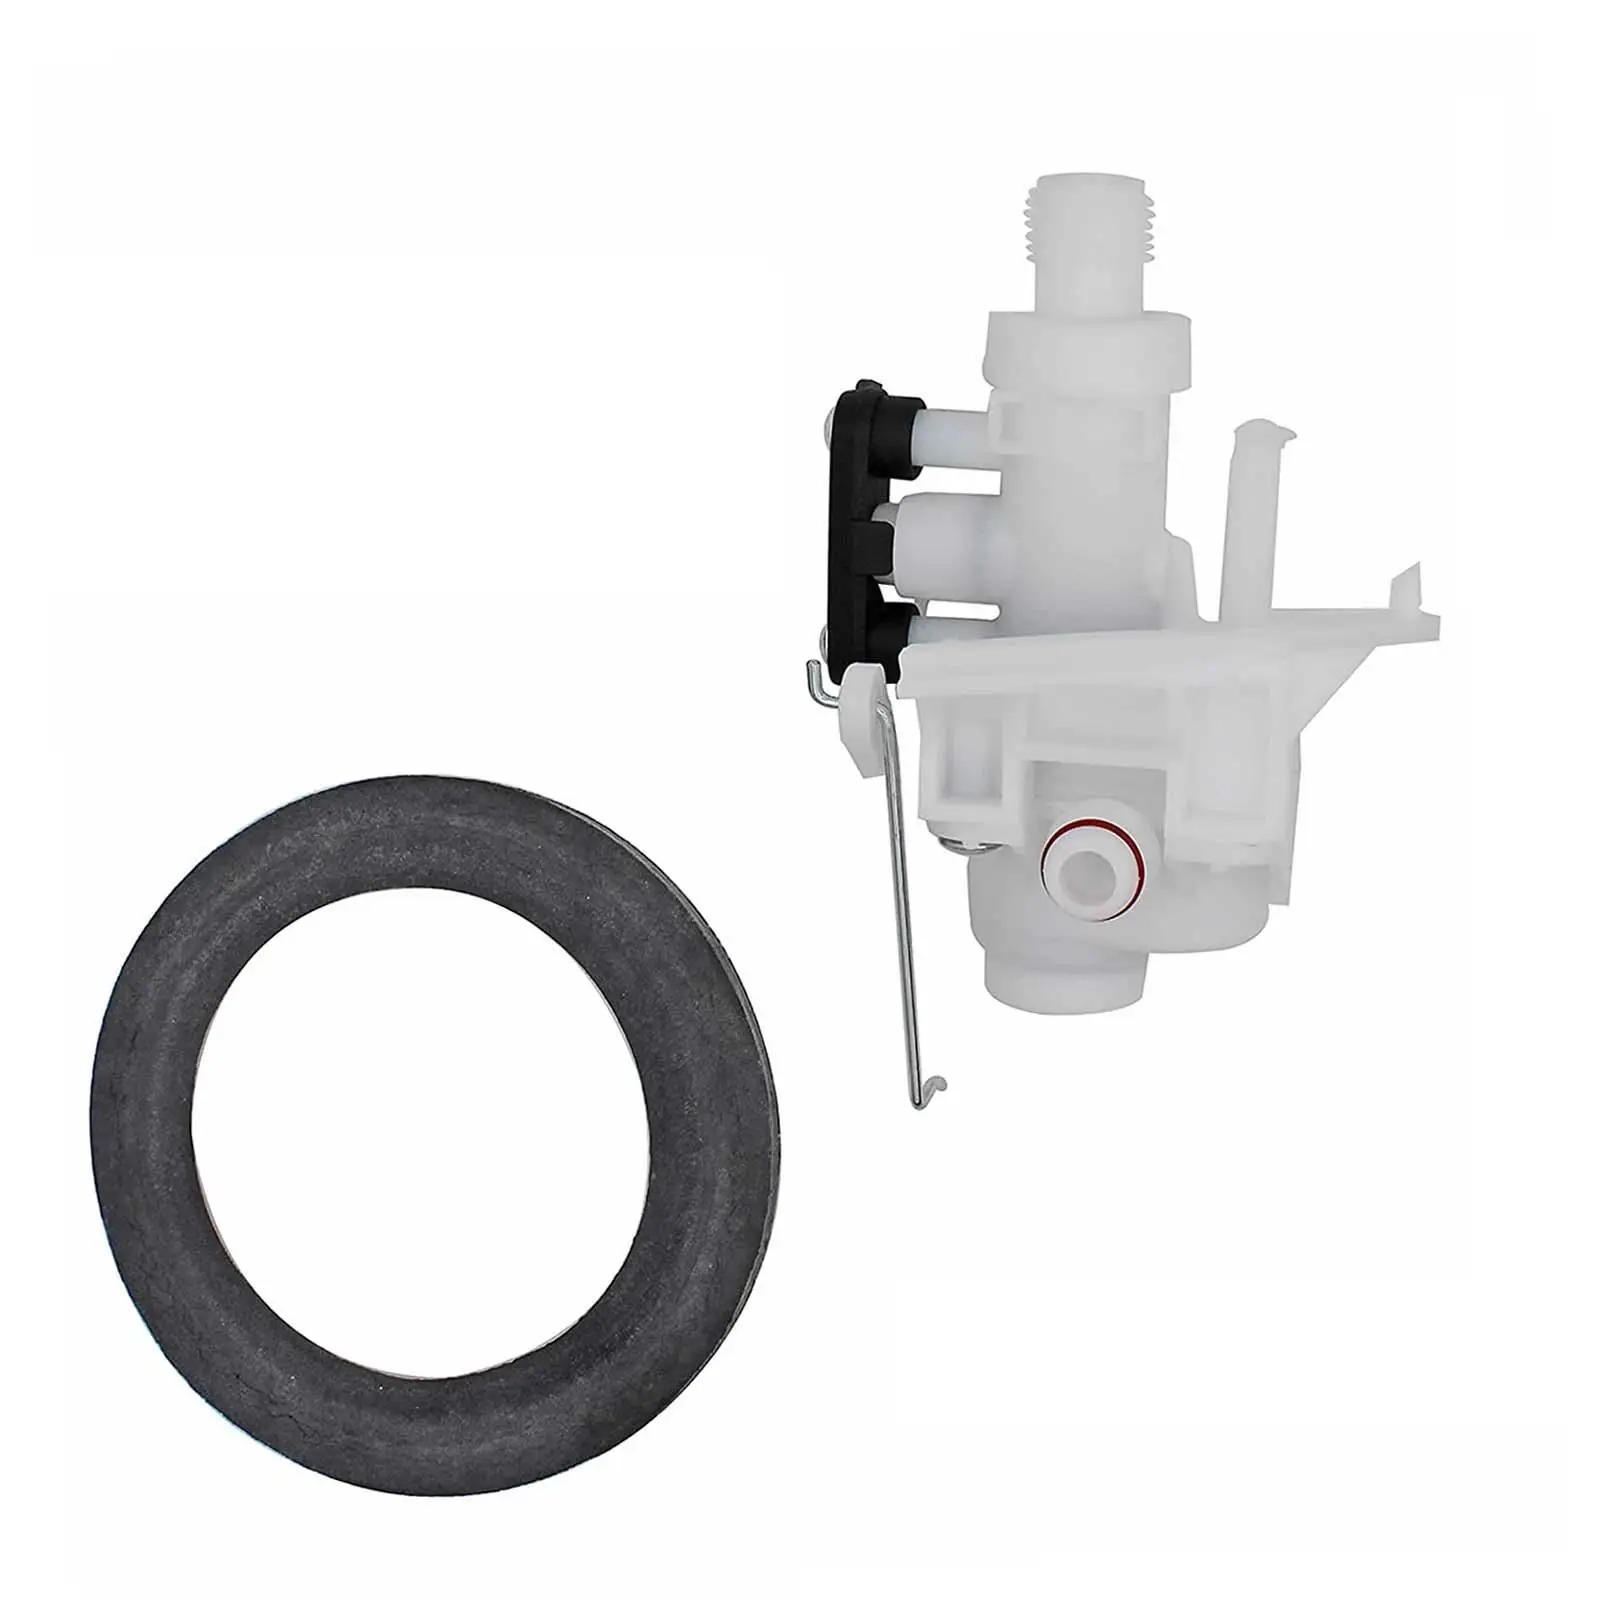 31705 Water Valve Convenient Easy to Install Upgraded Toilet Water Module Assembly for RV Motor Home Replace Parts Accessories